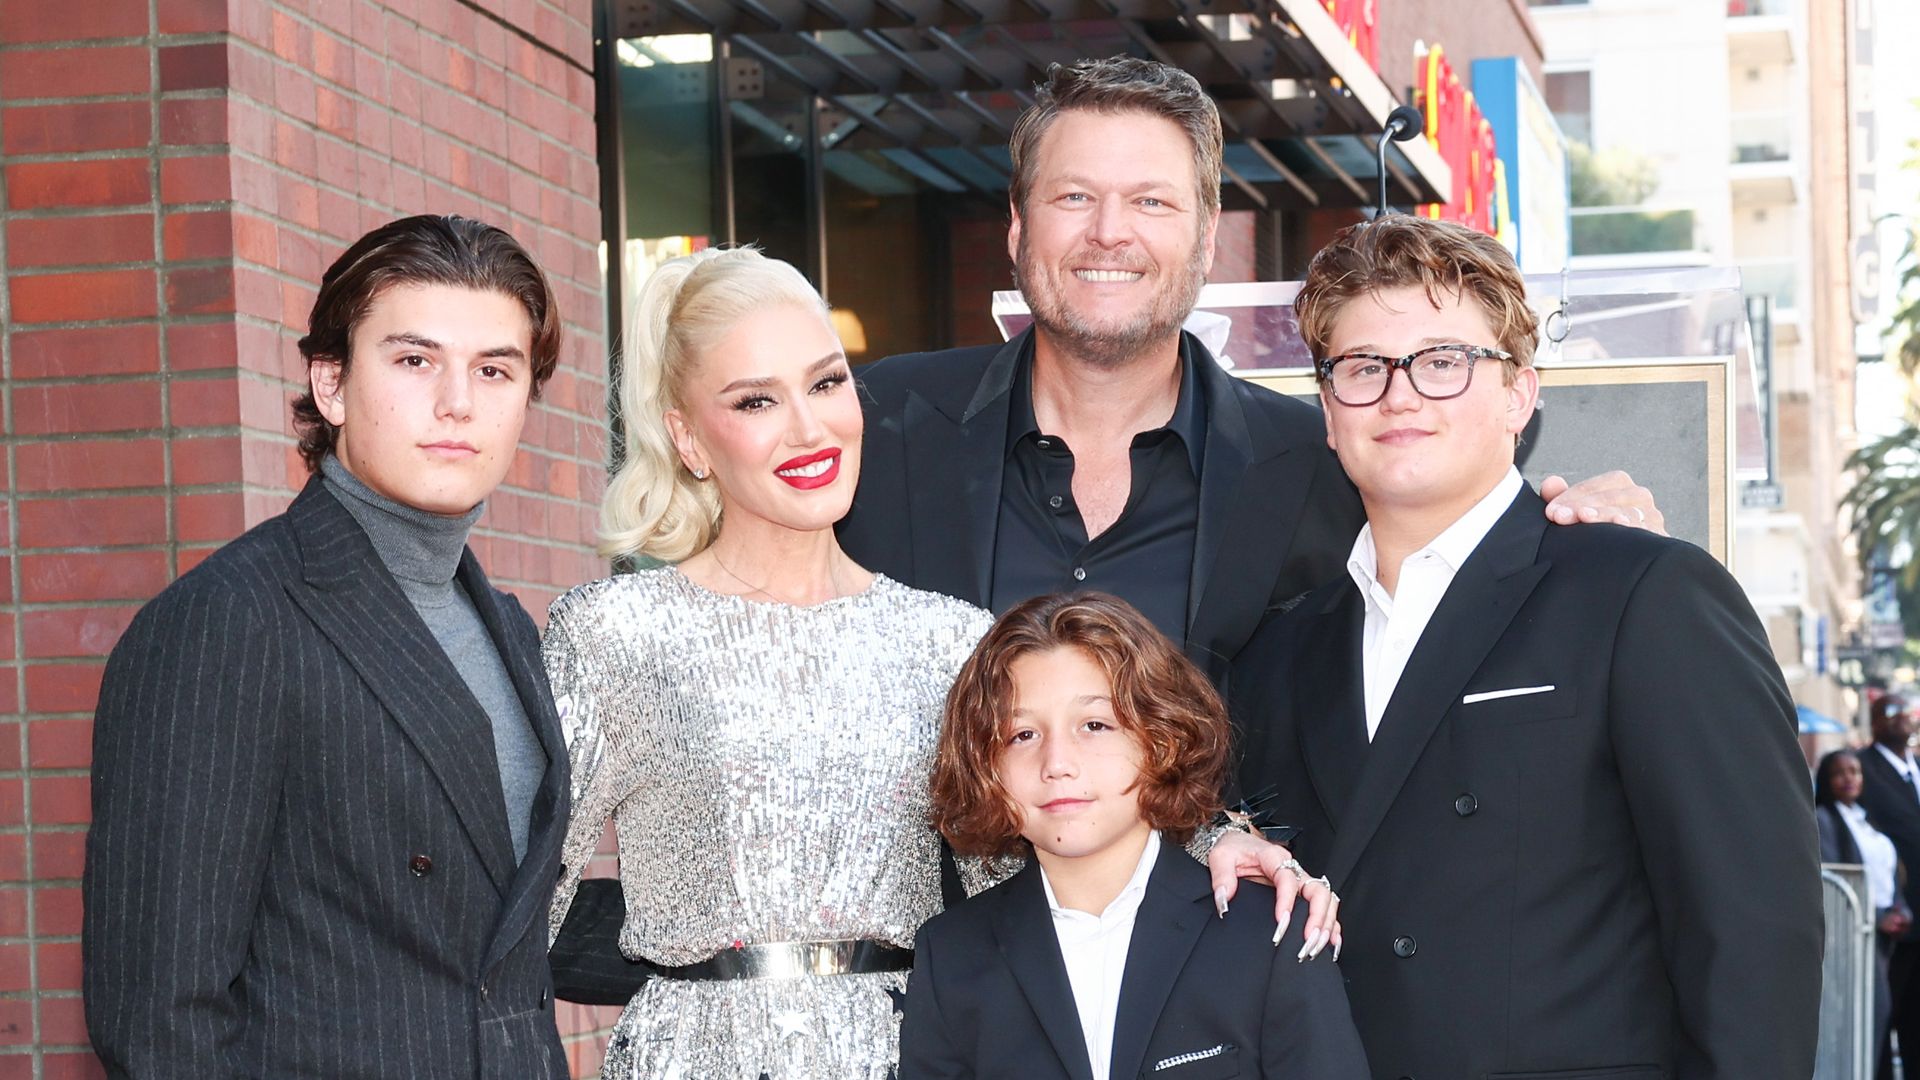 Kingston Rossdale, Gwen Stefani, Apollo Rossdale, Blake Shelton and Zuma Rossdale at the star ceremony where Gwen Stefani is honored with a star on the Hollywood Walk of Fame in Los Angeles, California on October 19, 2023.